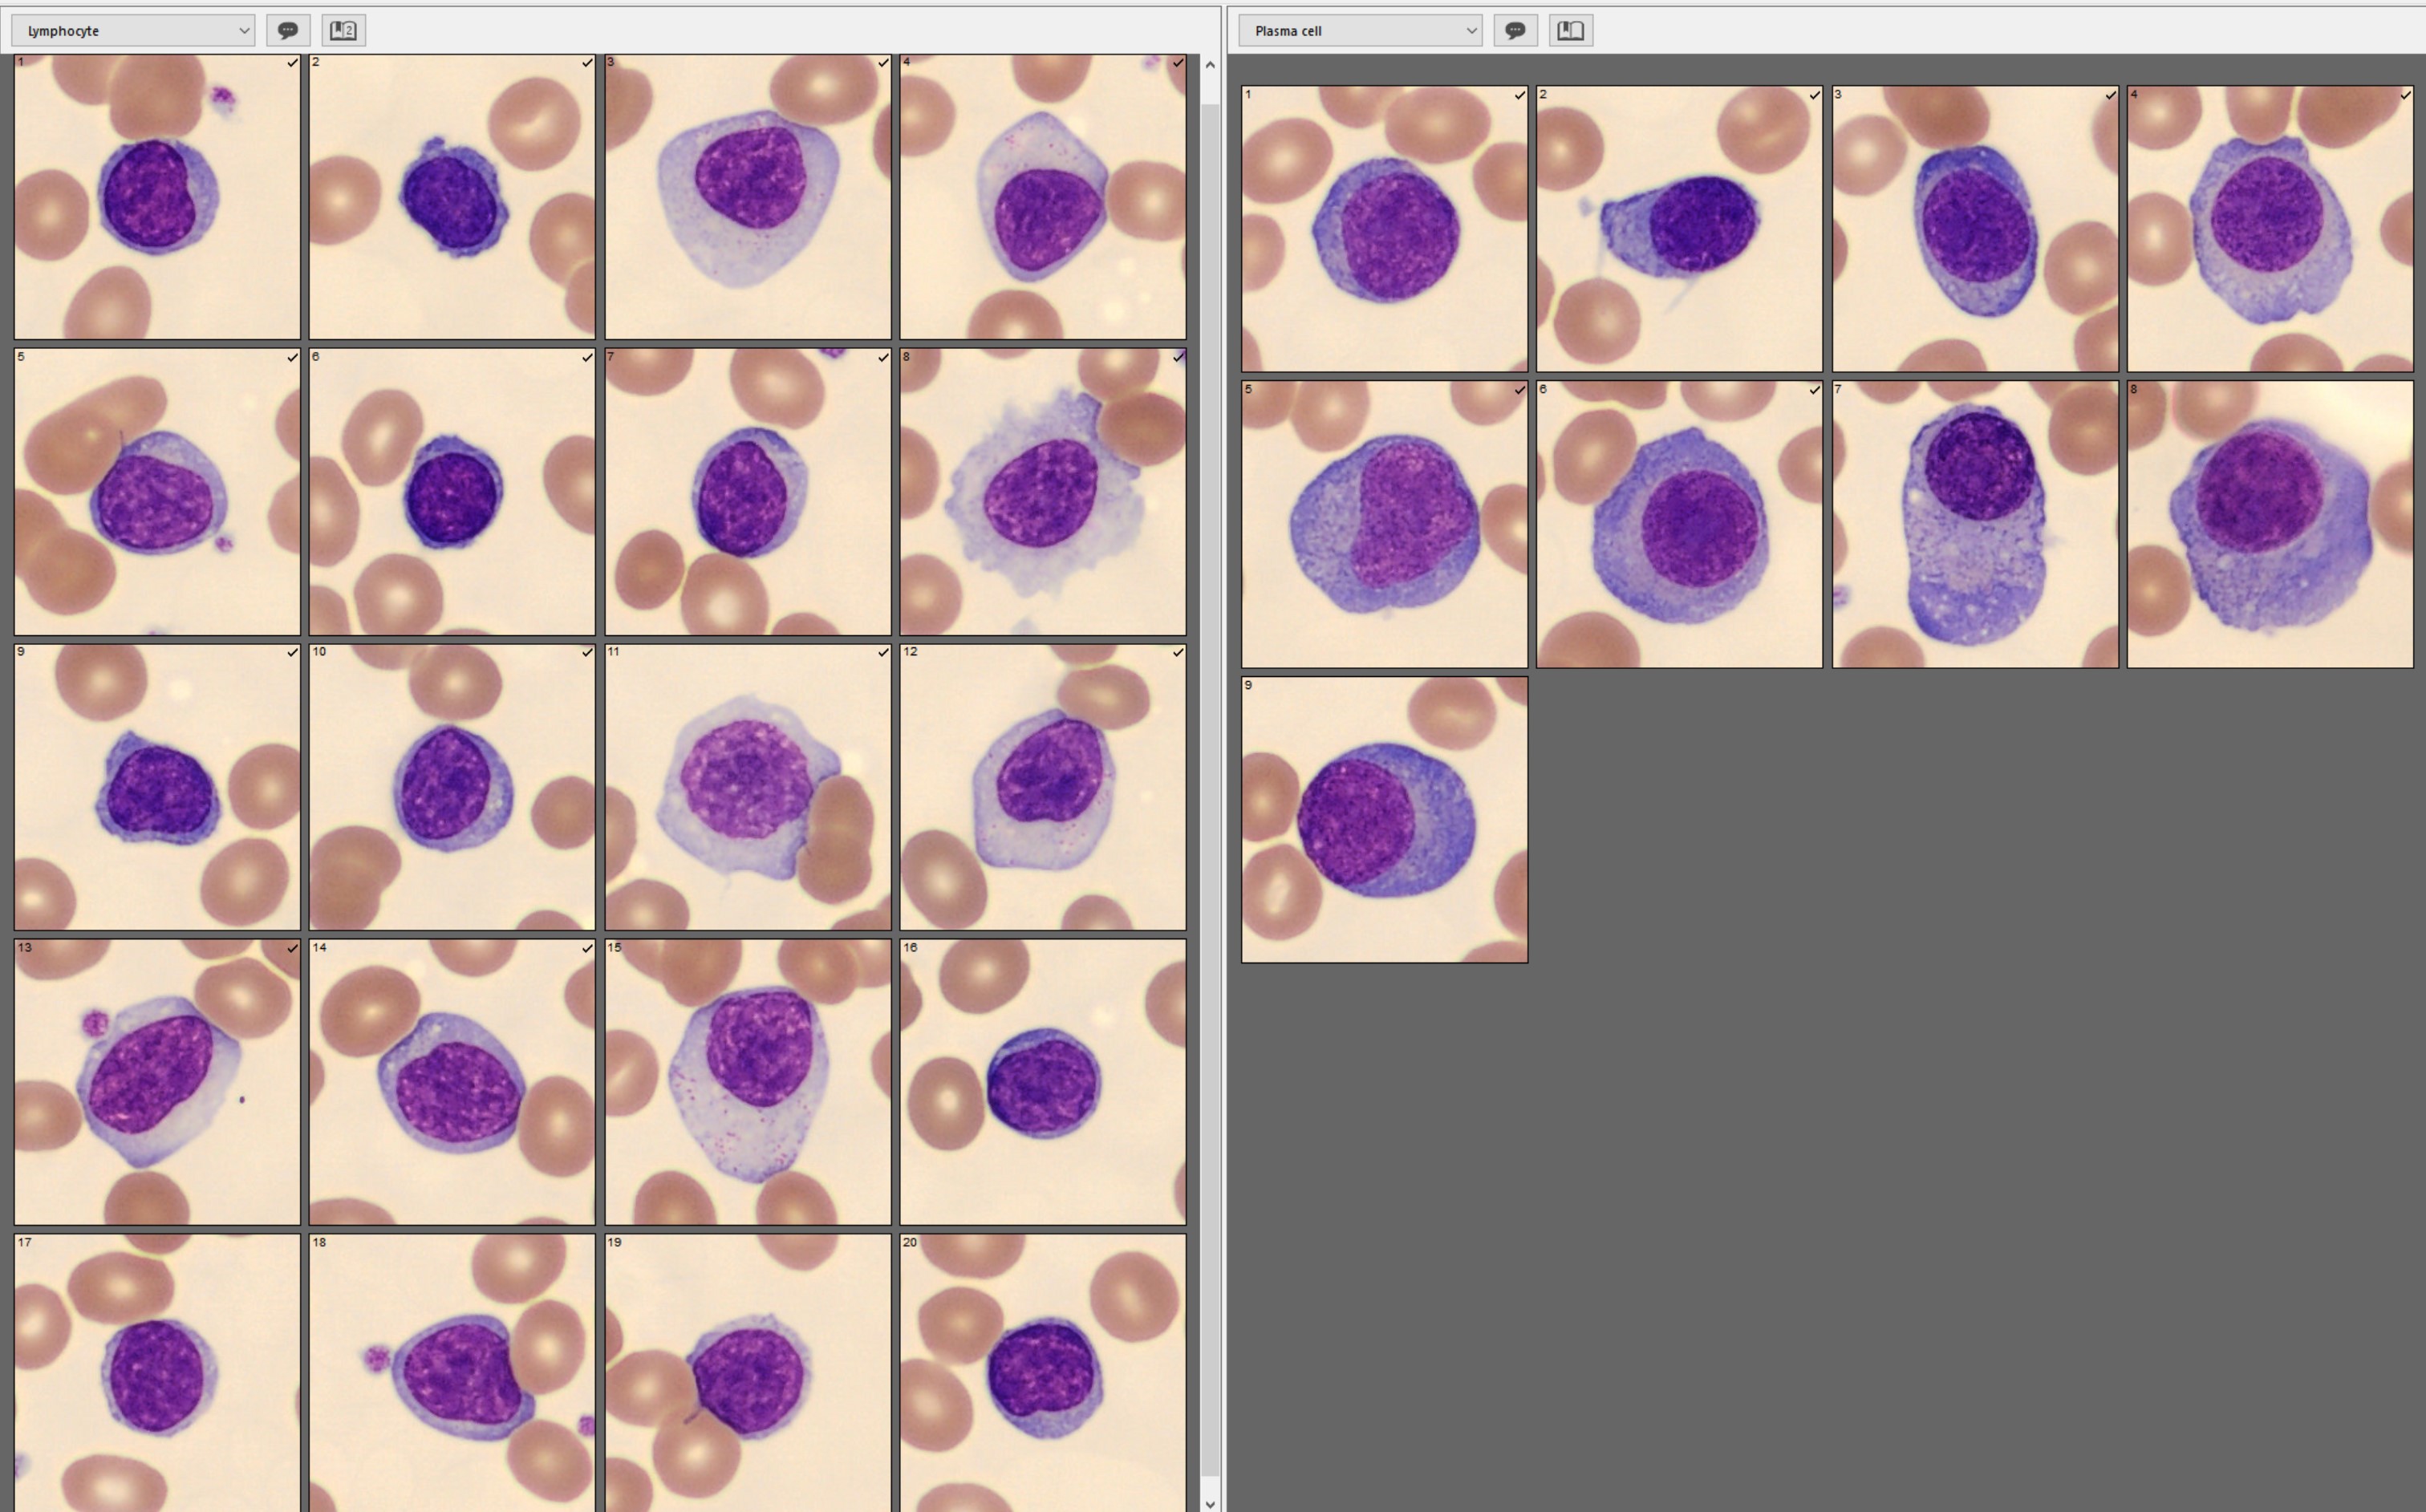 Lymphocytes vs plasma cells - side-by-side view with CellaVision DC-1